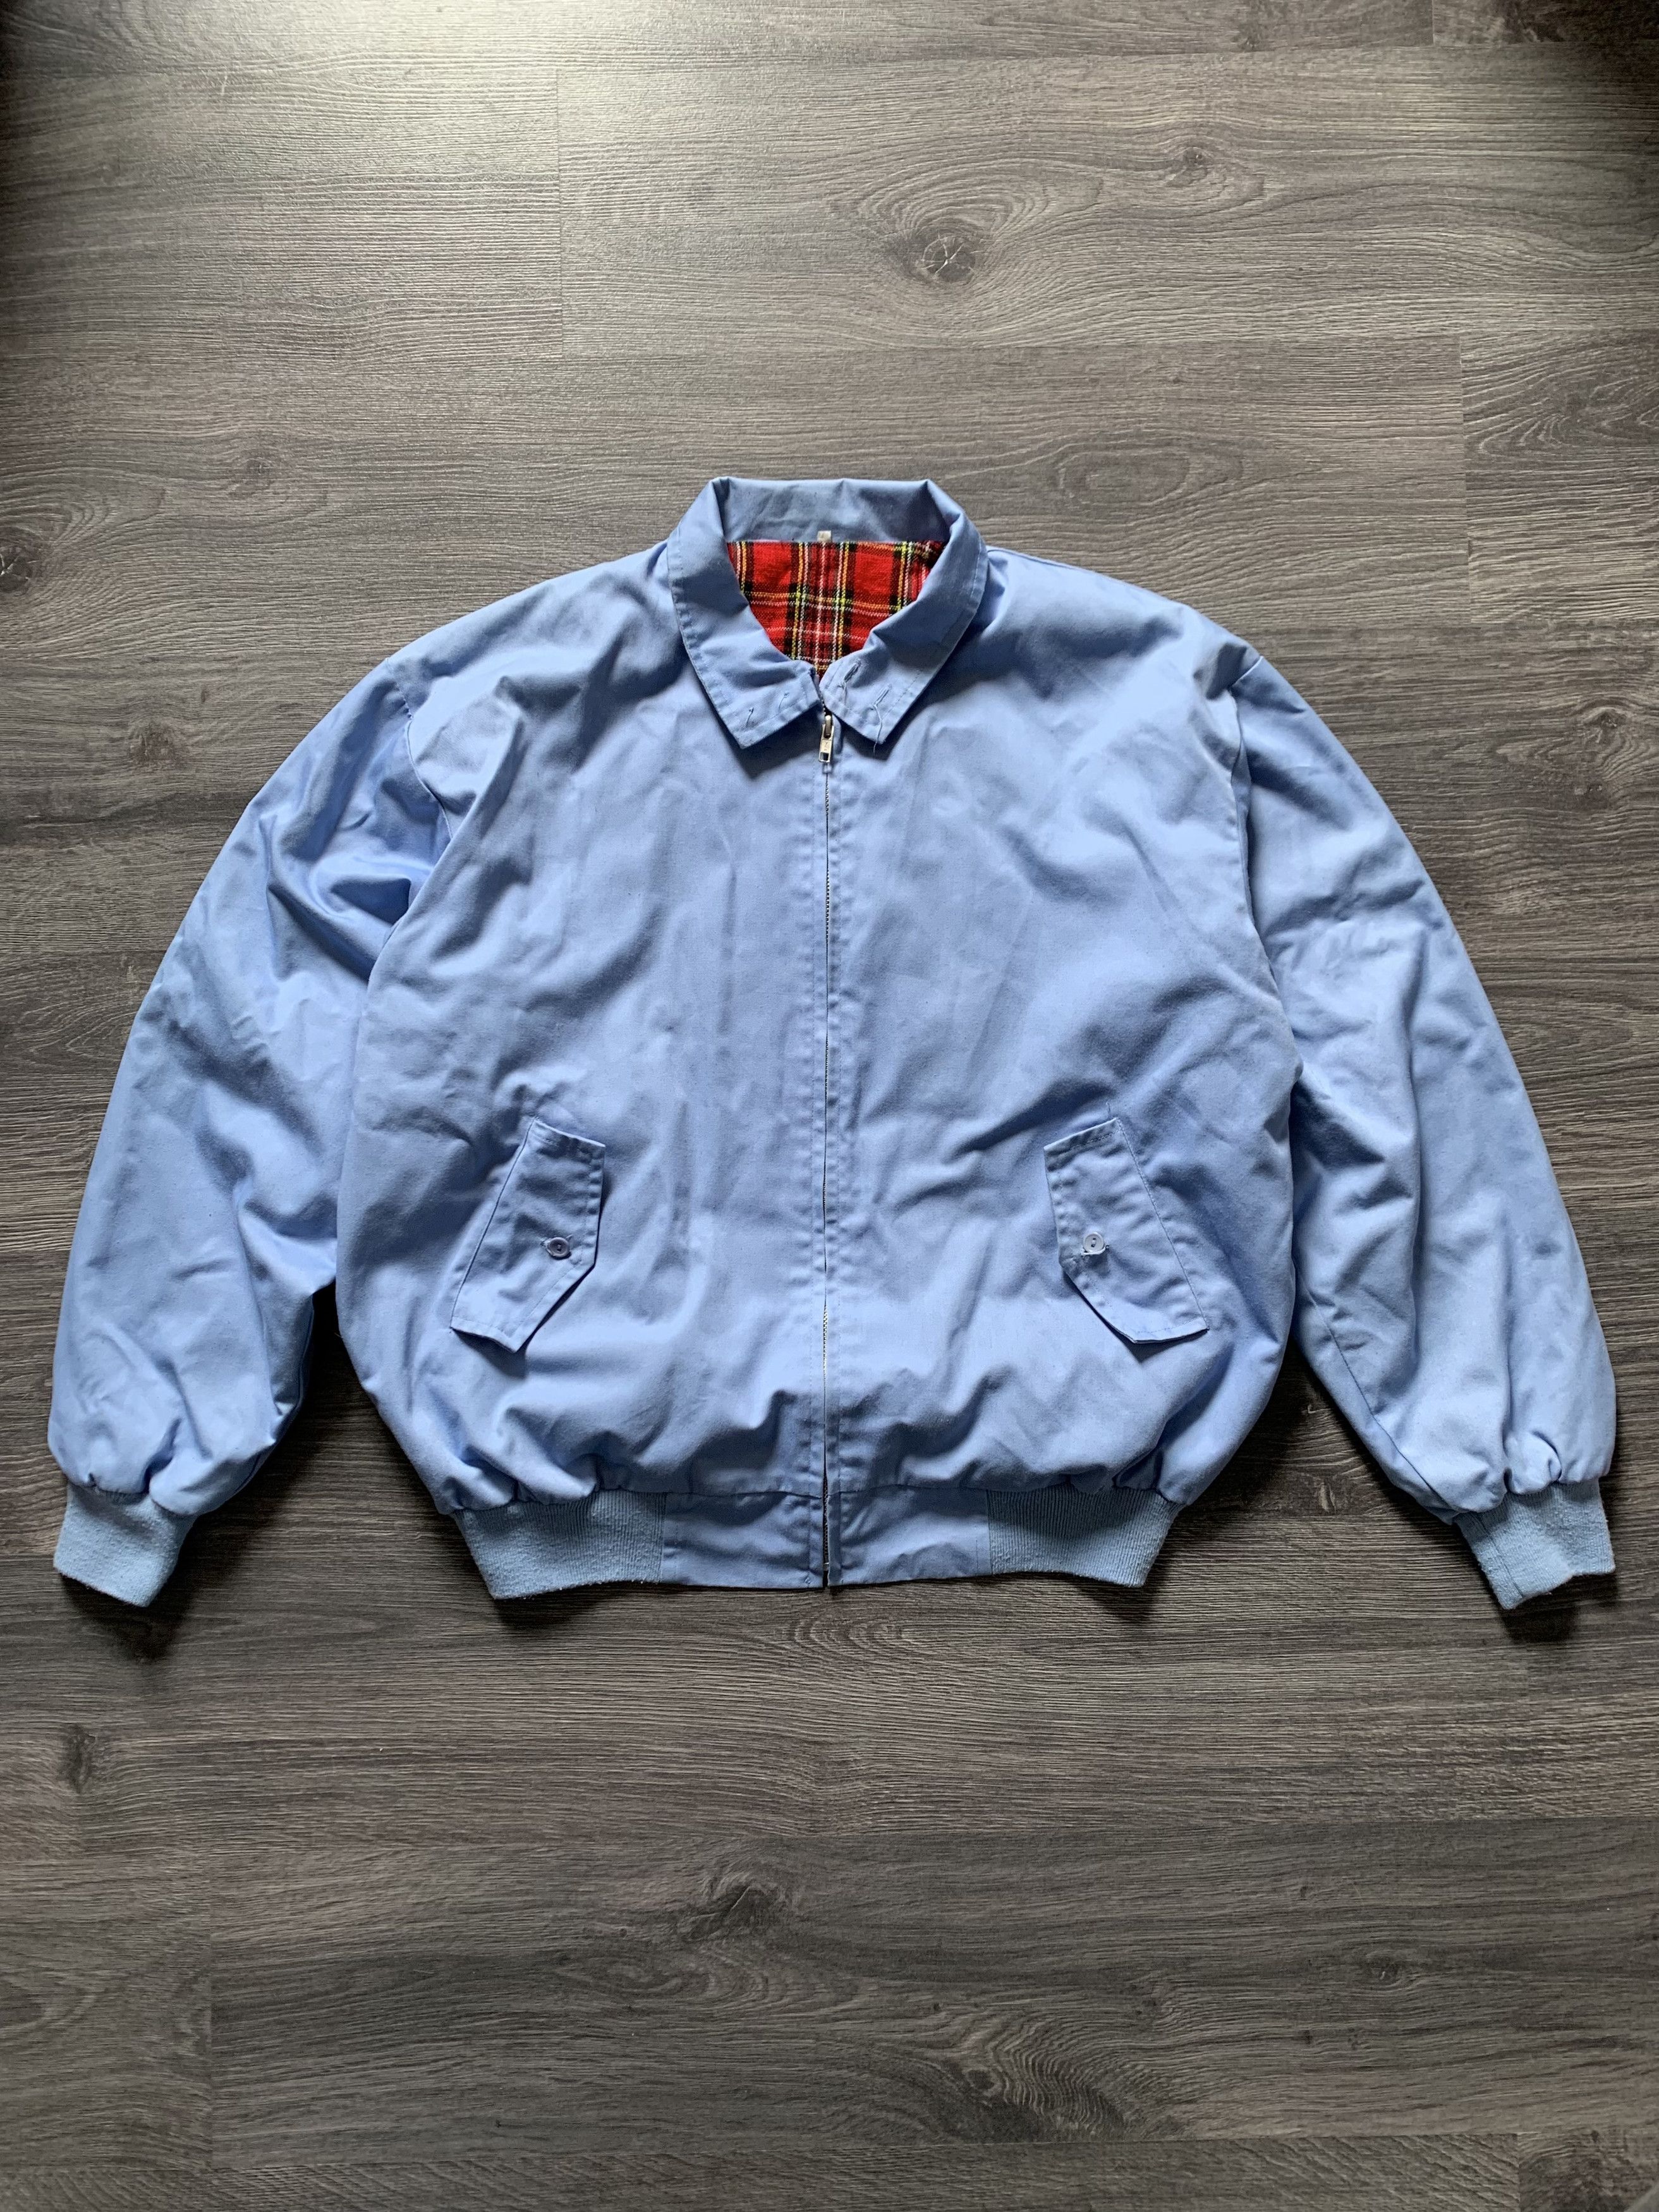 Pre-owned Bomber Jacket X Vintage 90's Baracuta G9 Style Bomber Jacket Made In England In Blue